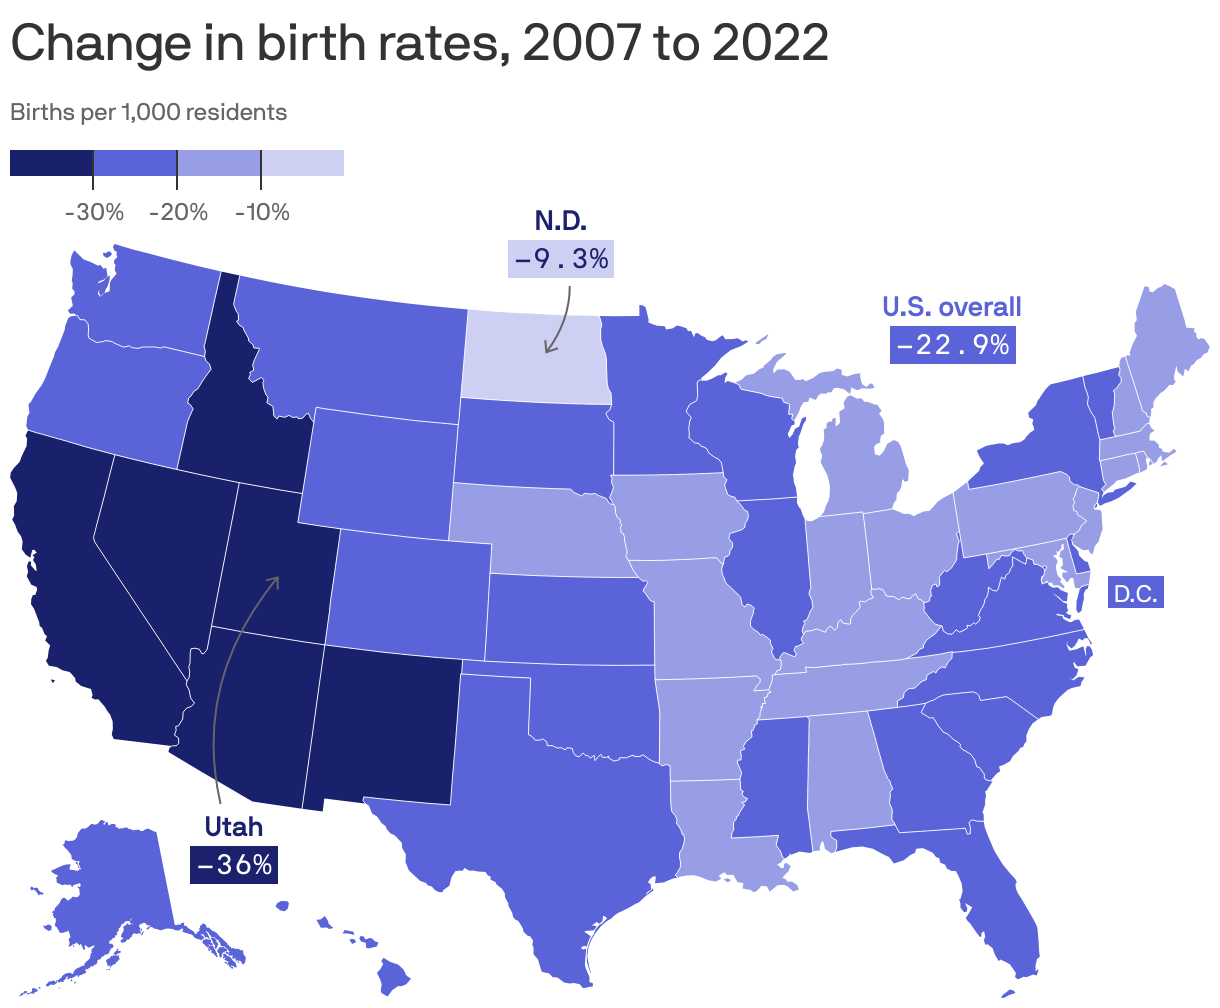 Change in birth rates, 2007 to 2022